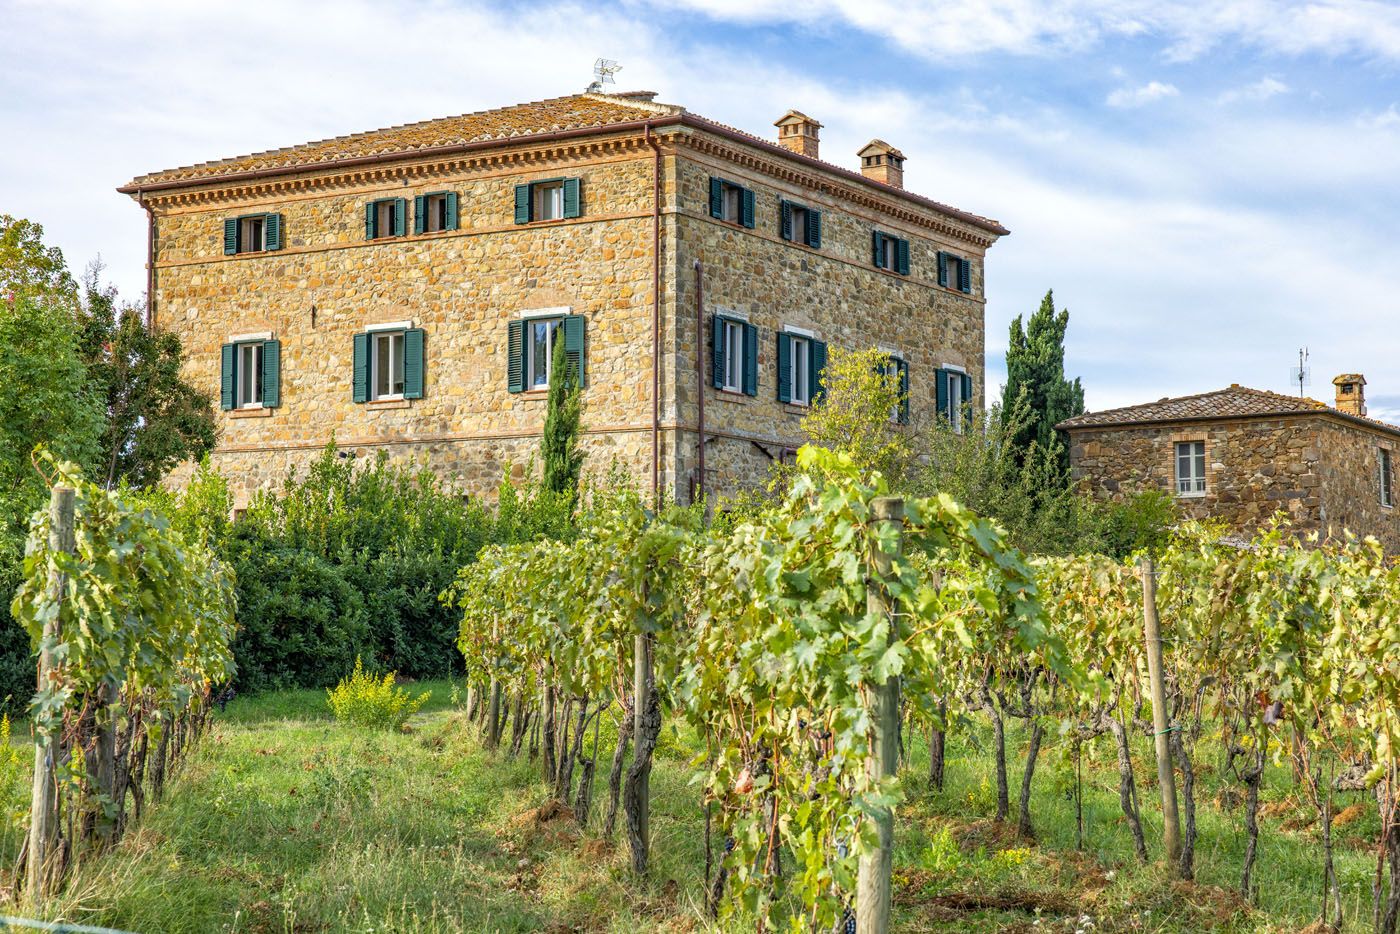 Villa le Prata | Best Things to Do in Tuscany